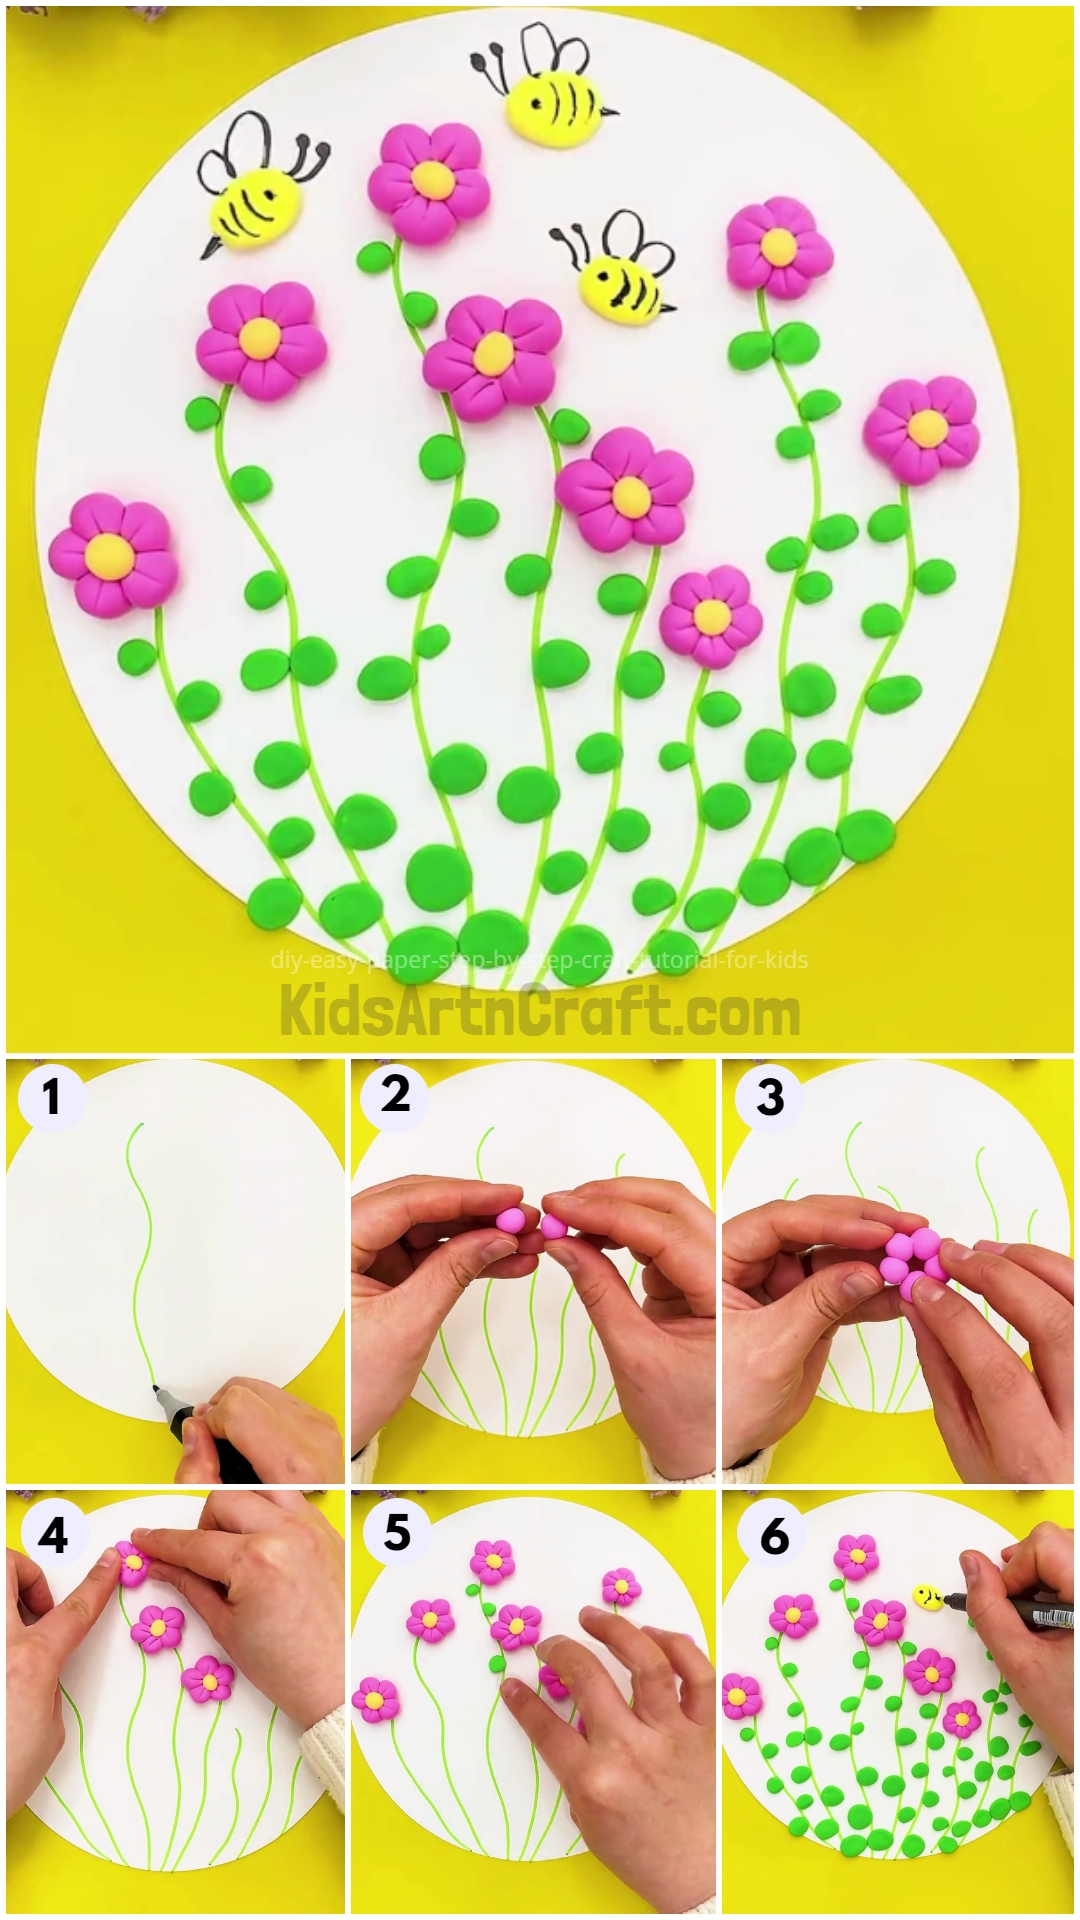 How To Make Clay flower Artwork easy Tutorial for Kids